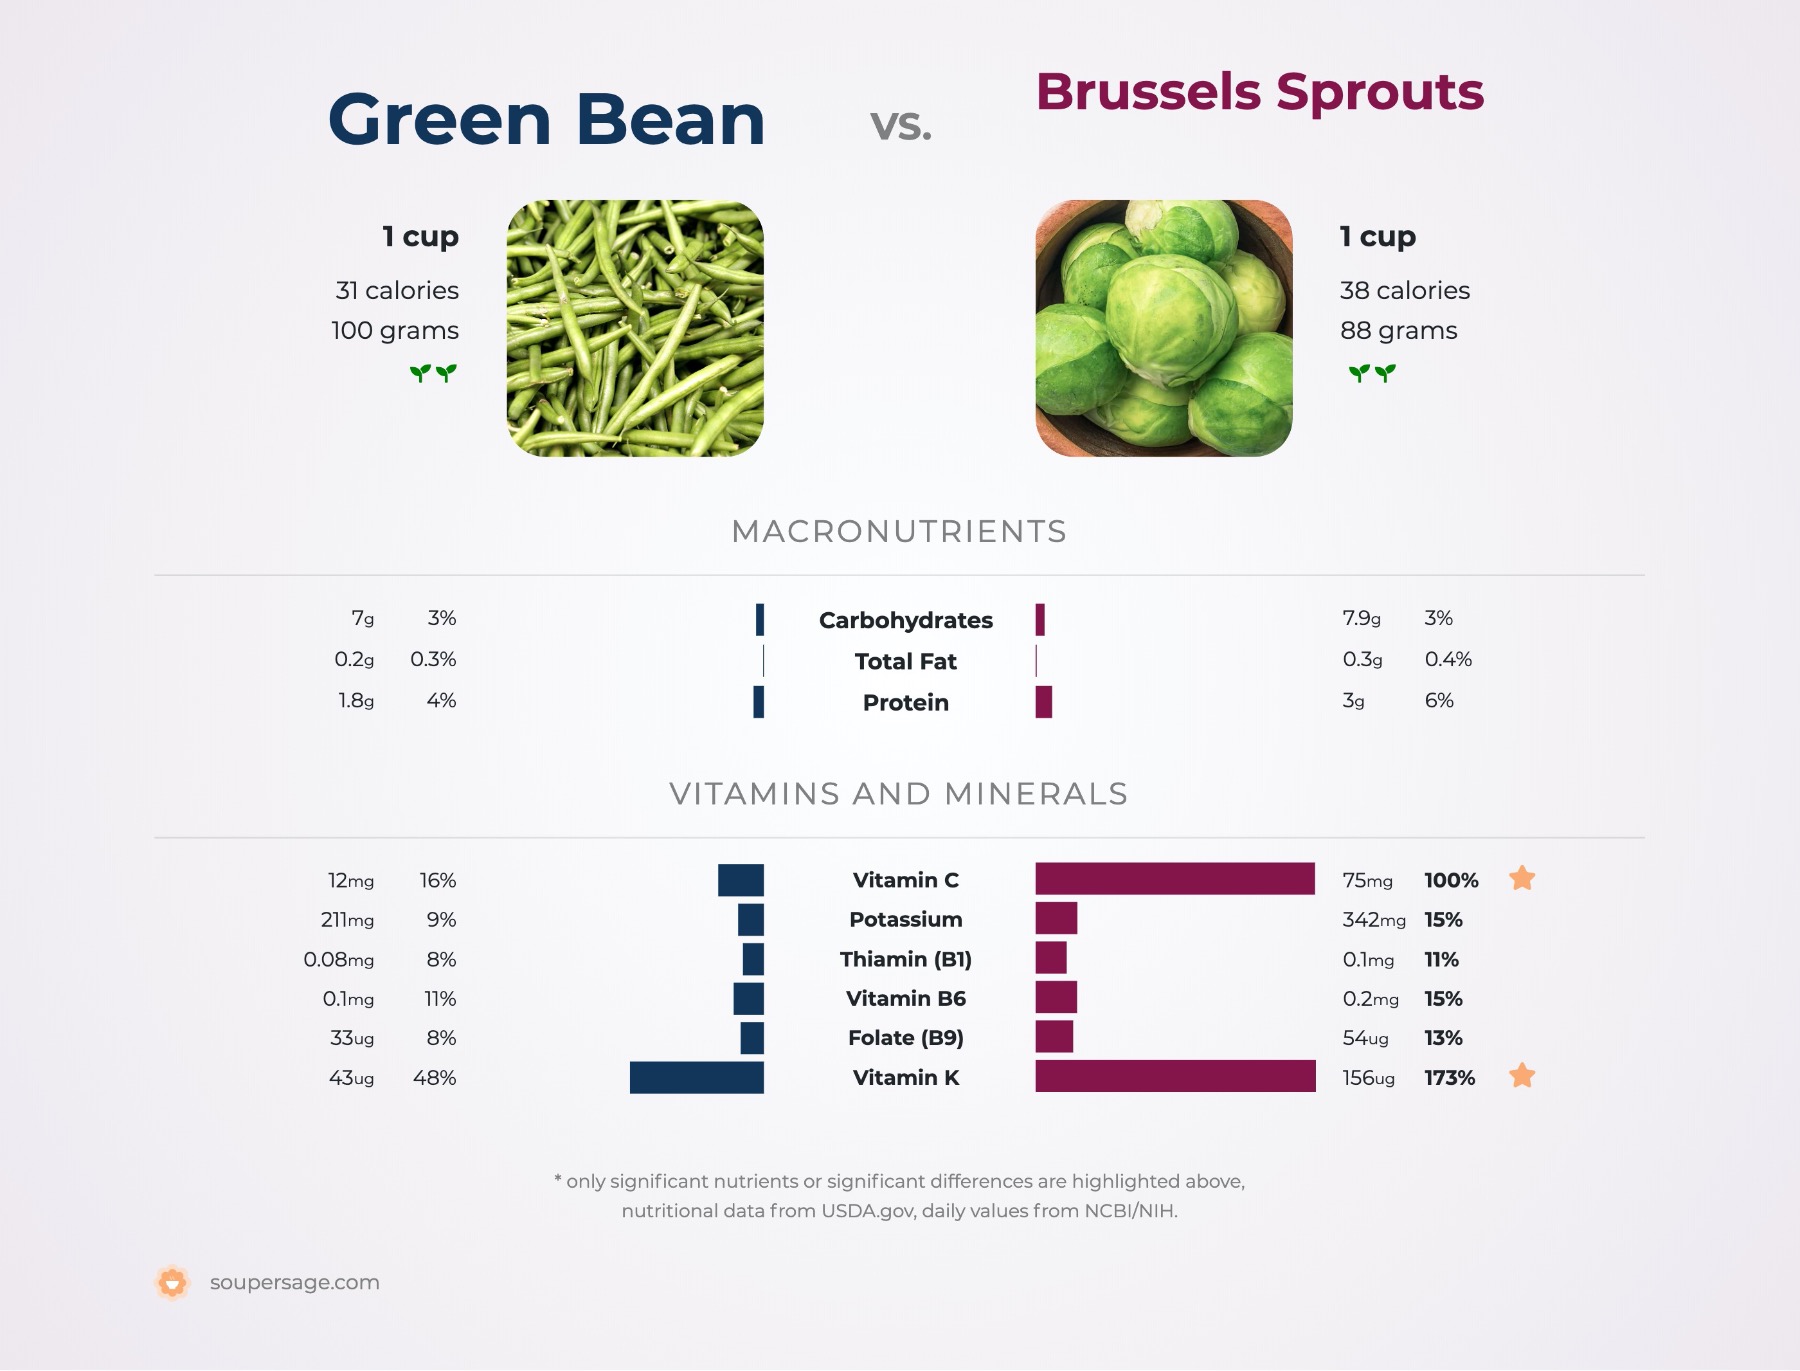 nutrition comparison of brussels sprouts vs. green bean